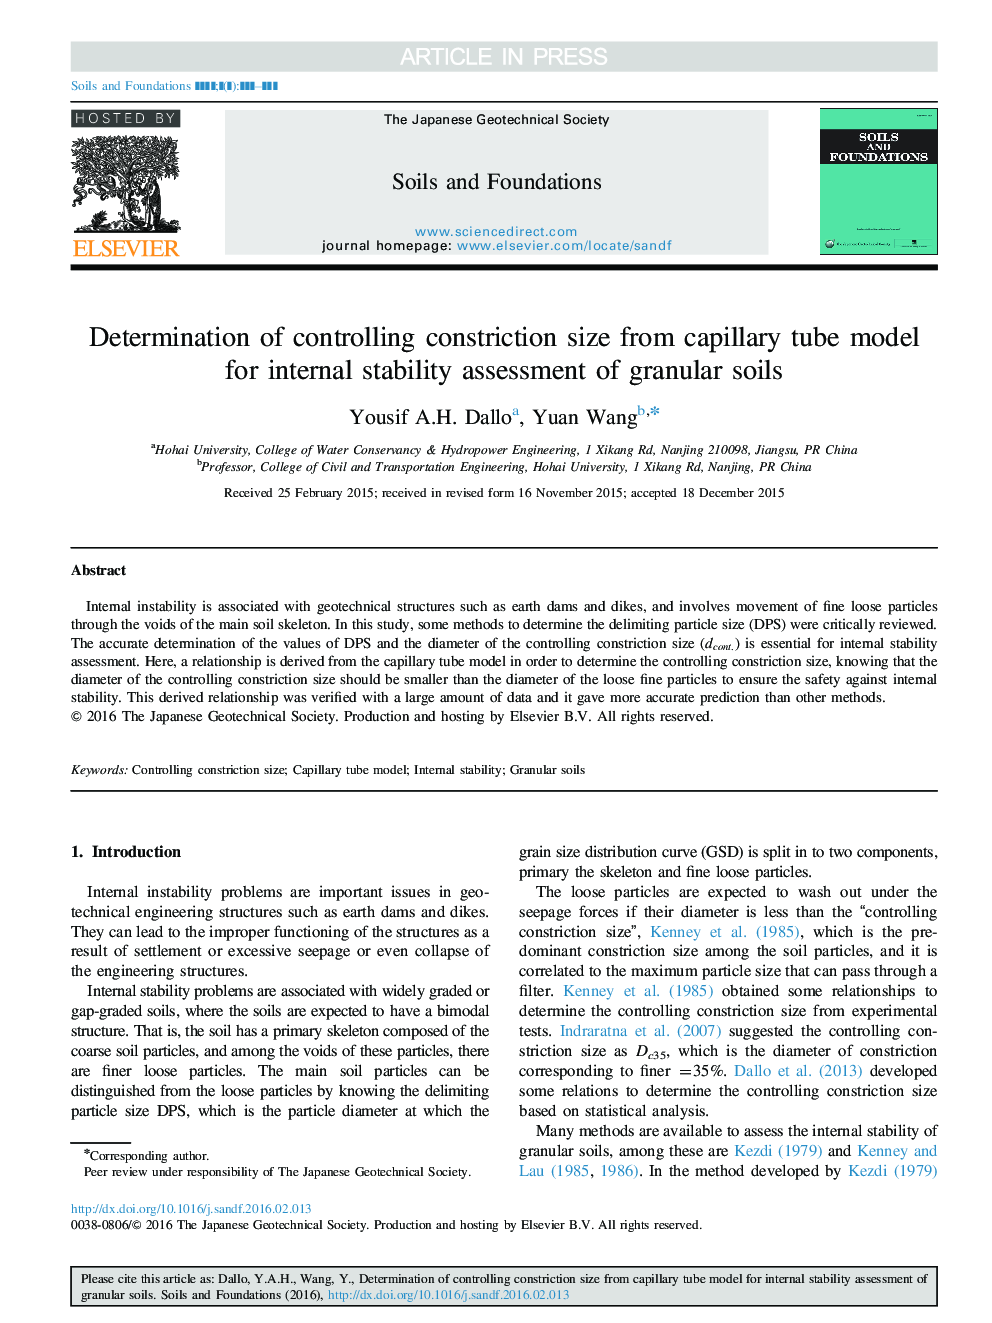 Determination of controlling constriction size from capillary tube model for internal stability assessment of granular soils